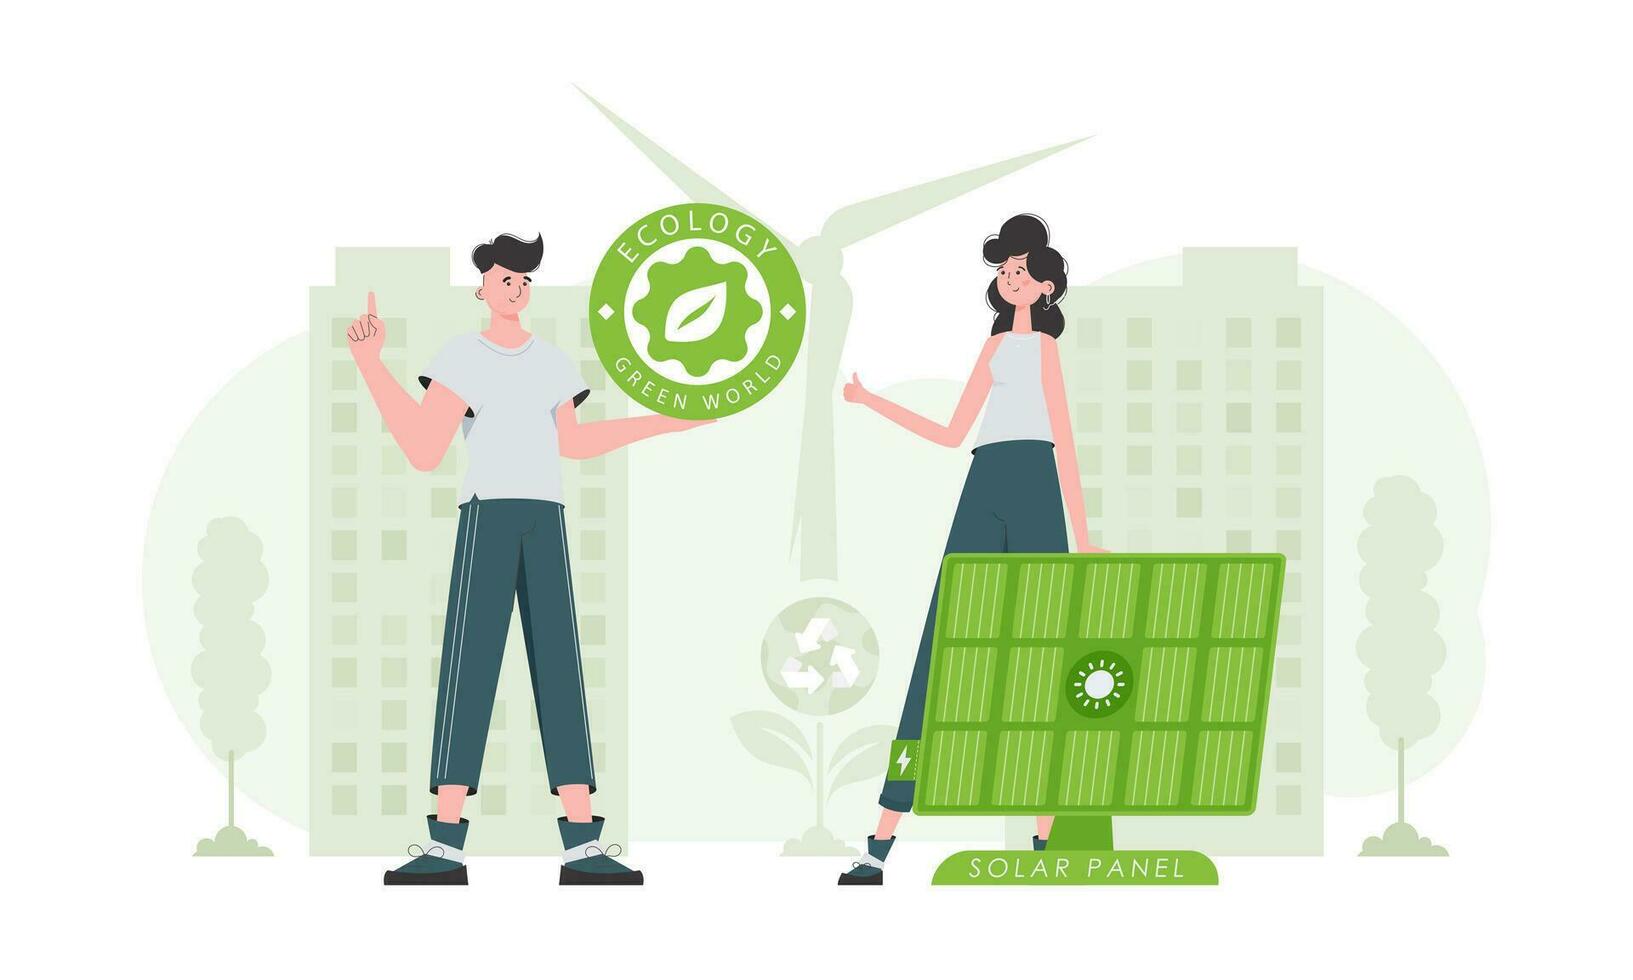 Man and woman and solar panel. The concept of solar energy. Vector illustration.